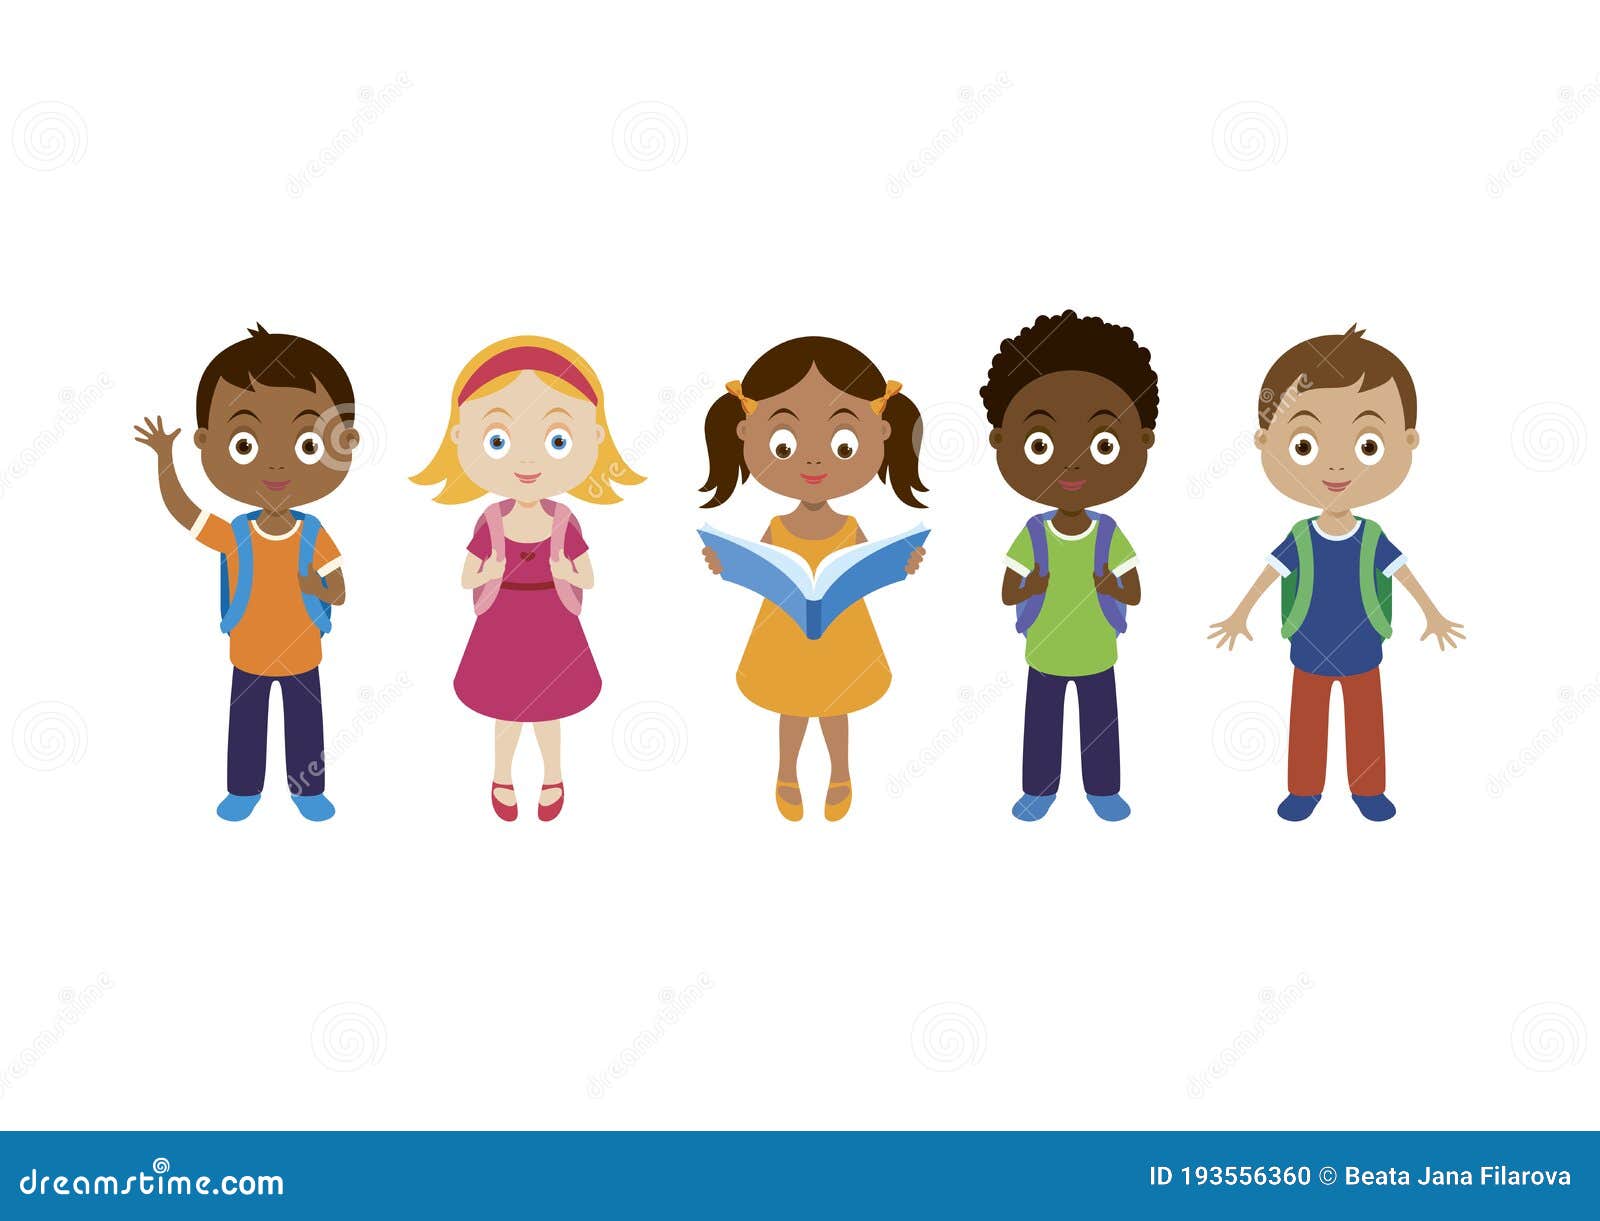 https://thumbs.dreamstime.com/z/happy-kids-different-races-vector-group-school-children-cartoon-character-row-clipart-cute-multicultural-icon-set-back-to-193556360.jpg